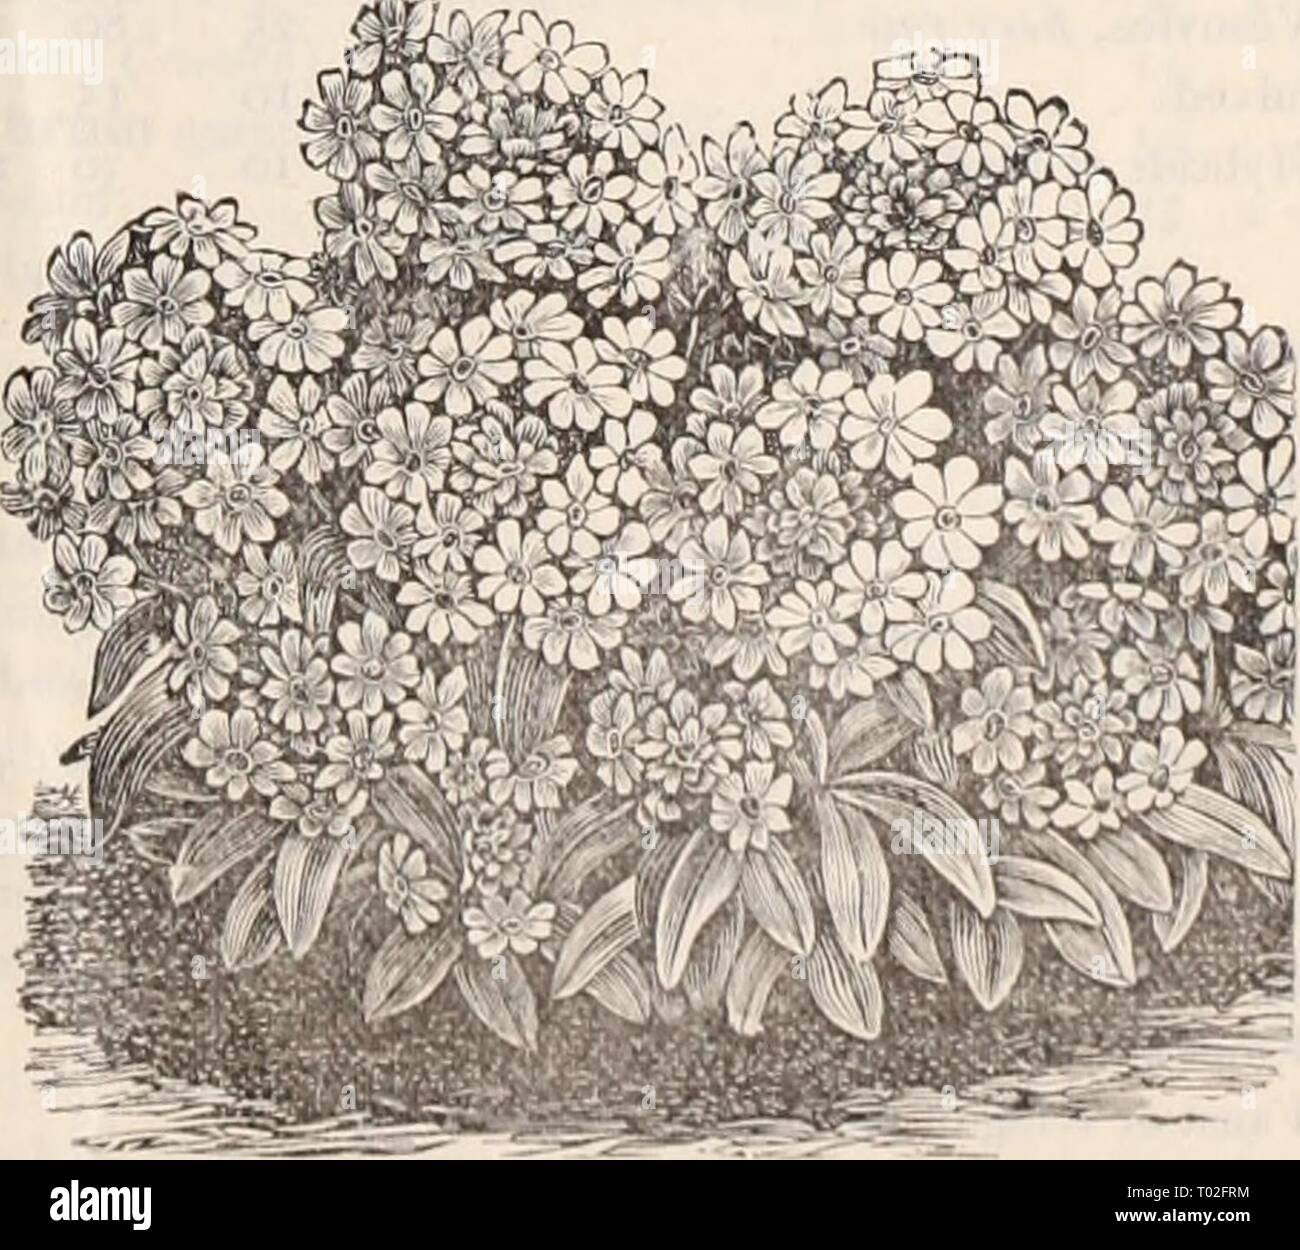 Dreer's wholesale price list / Henry A. Dreer. . dreerswholesalep1898dree Year:   Mignonette Machet. Mesembryanthemum tricolor, mixed. . . . cordifolium variegatuin Mignonette, large flowering, lb. 40 cts. . . . large flowering, pyramidal Miles' Hybrid Spiral Improved Red Victoria Golden Queen Gabrielle Defiance, ve7y large spikes Machet, frtte select stock Parson's white Salmon Queen, highly colored Golden Machet, ne-a', fine Mimosa Y&gt;xdca [Sensitive Plant) ....... Mimulus moschatus [Musk Plant) tigrinus mixed [Monkey Flou^er) Mina lobata 'l fine Sanguinea / annual climbers Momordica bal Stock Photo